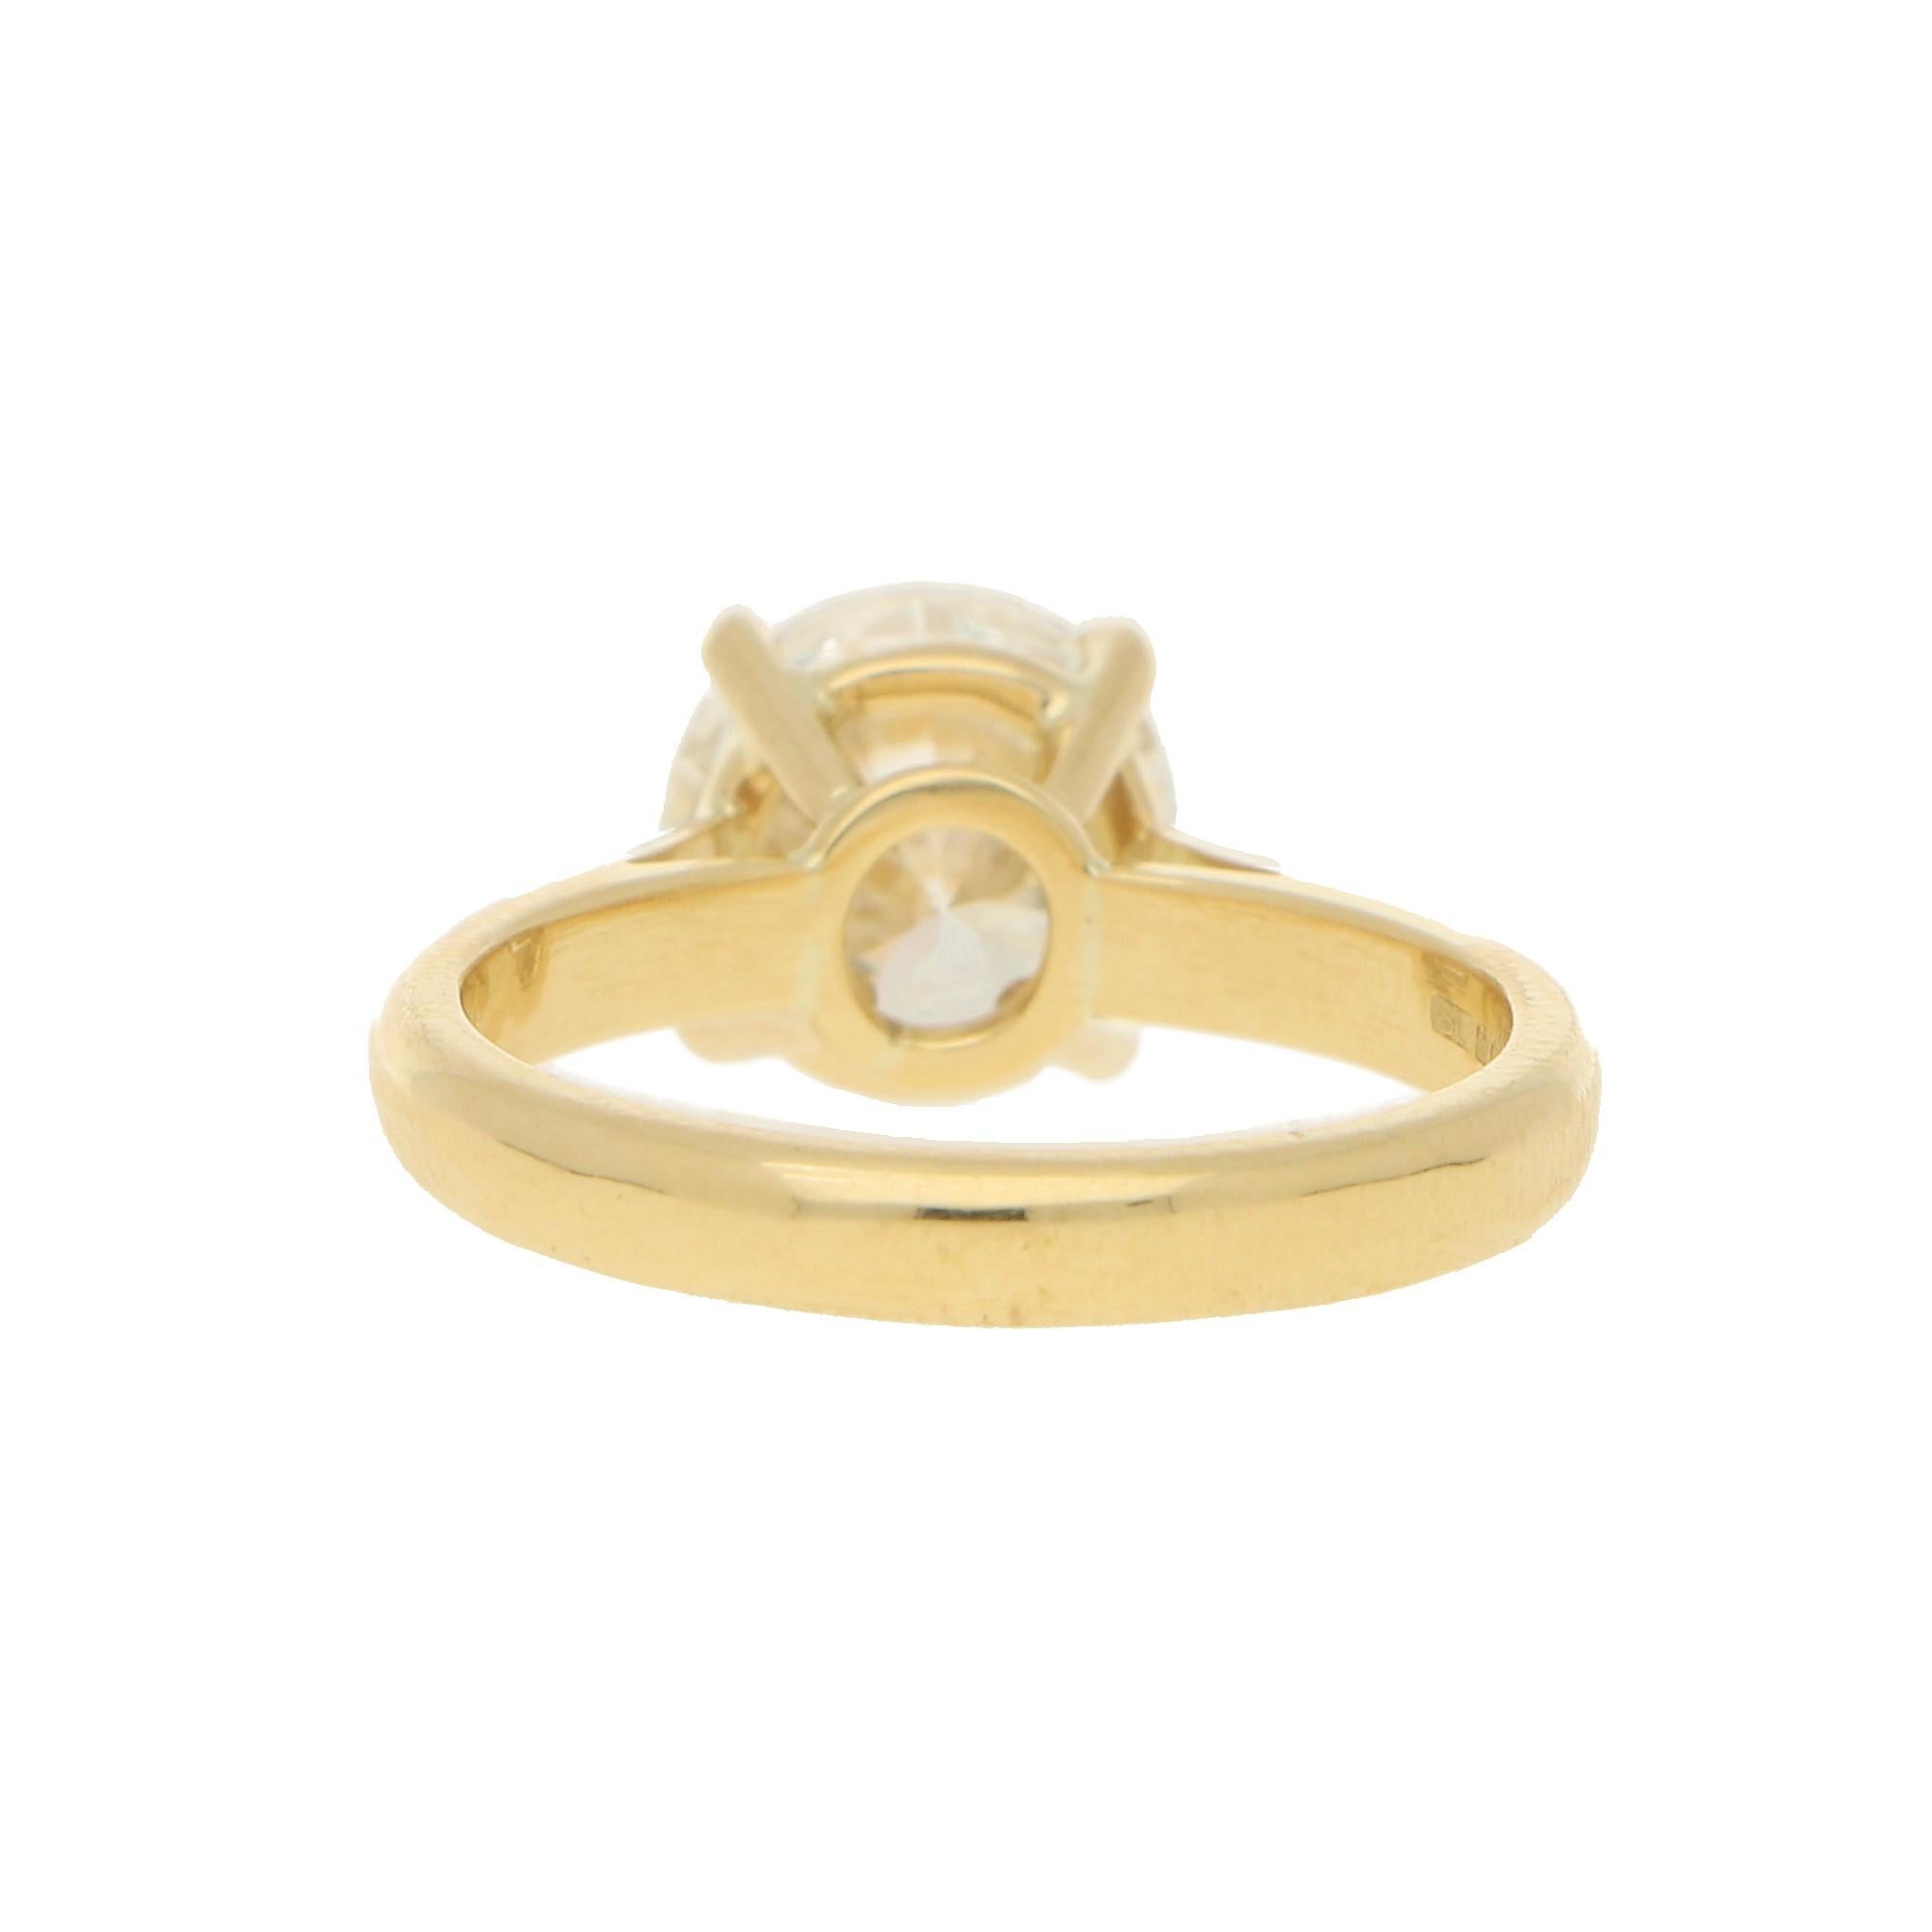 Women's or Men's Certified Diamond Solitaire Engagement Ring Set in 18k Yellow Gold